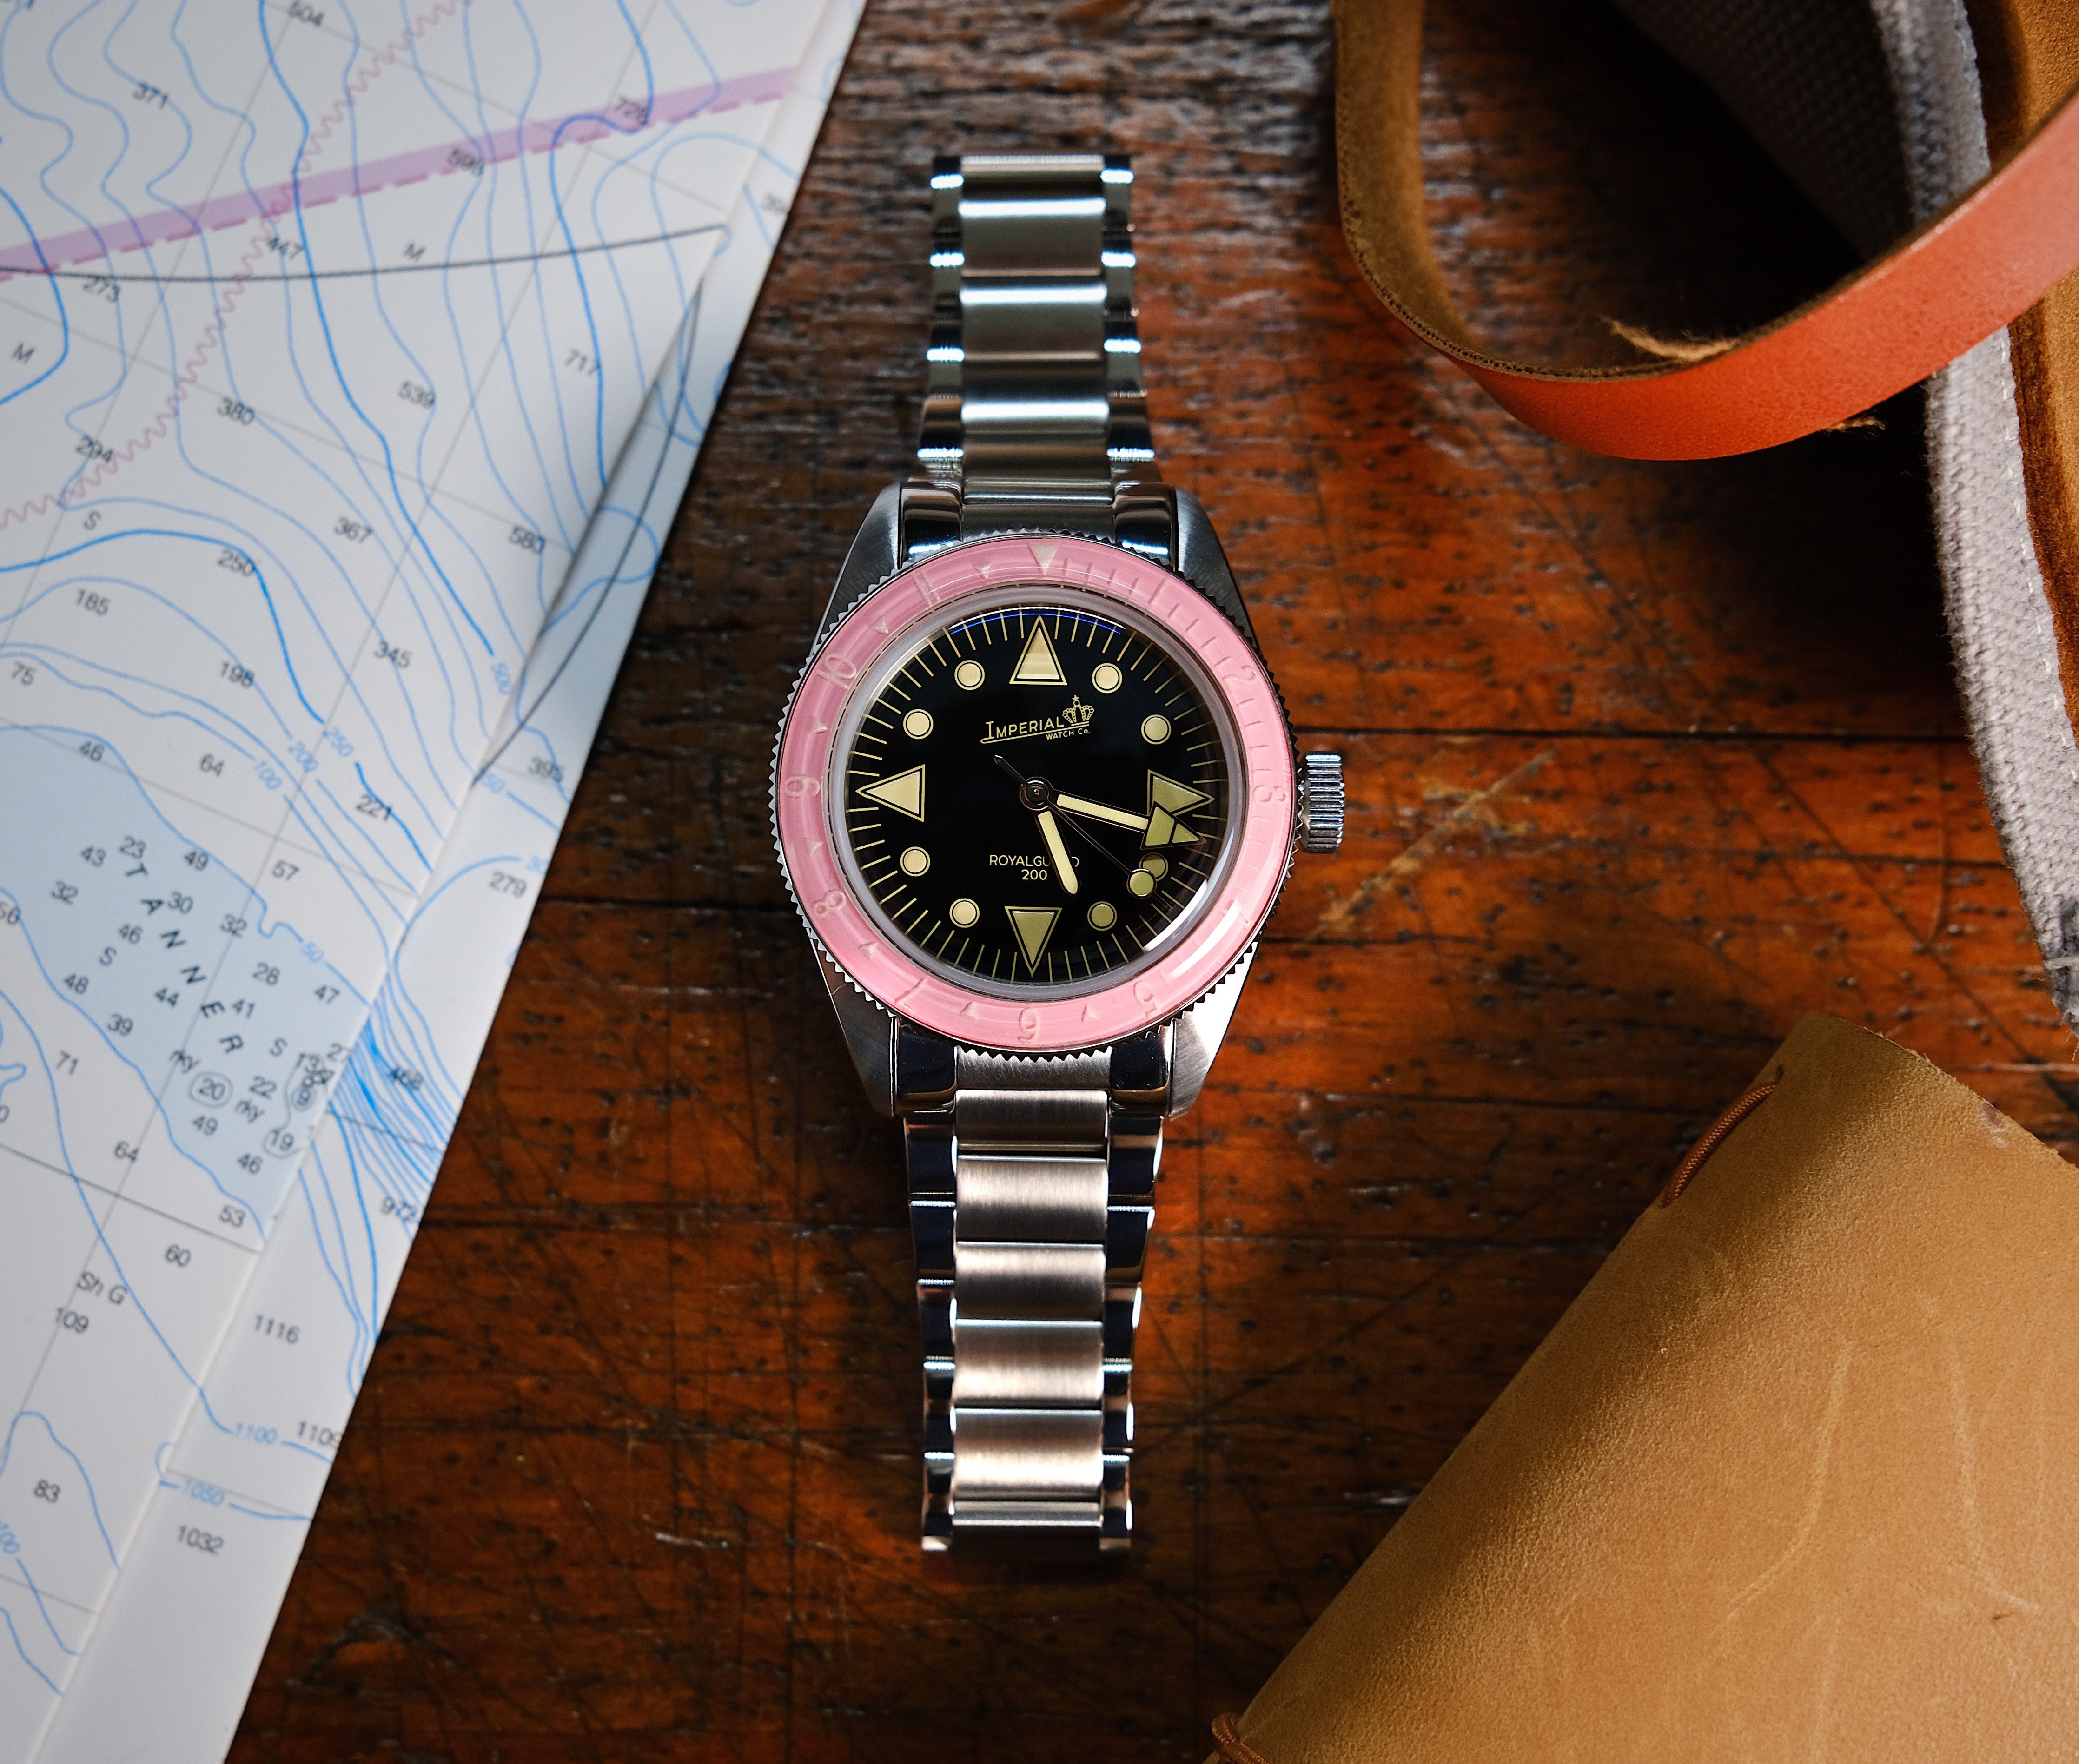 Imperial Watch Co. X Odokadolo Collab - "Pink Royalty"